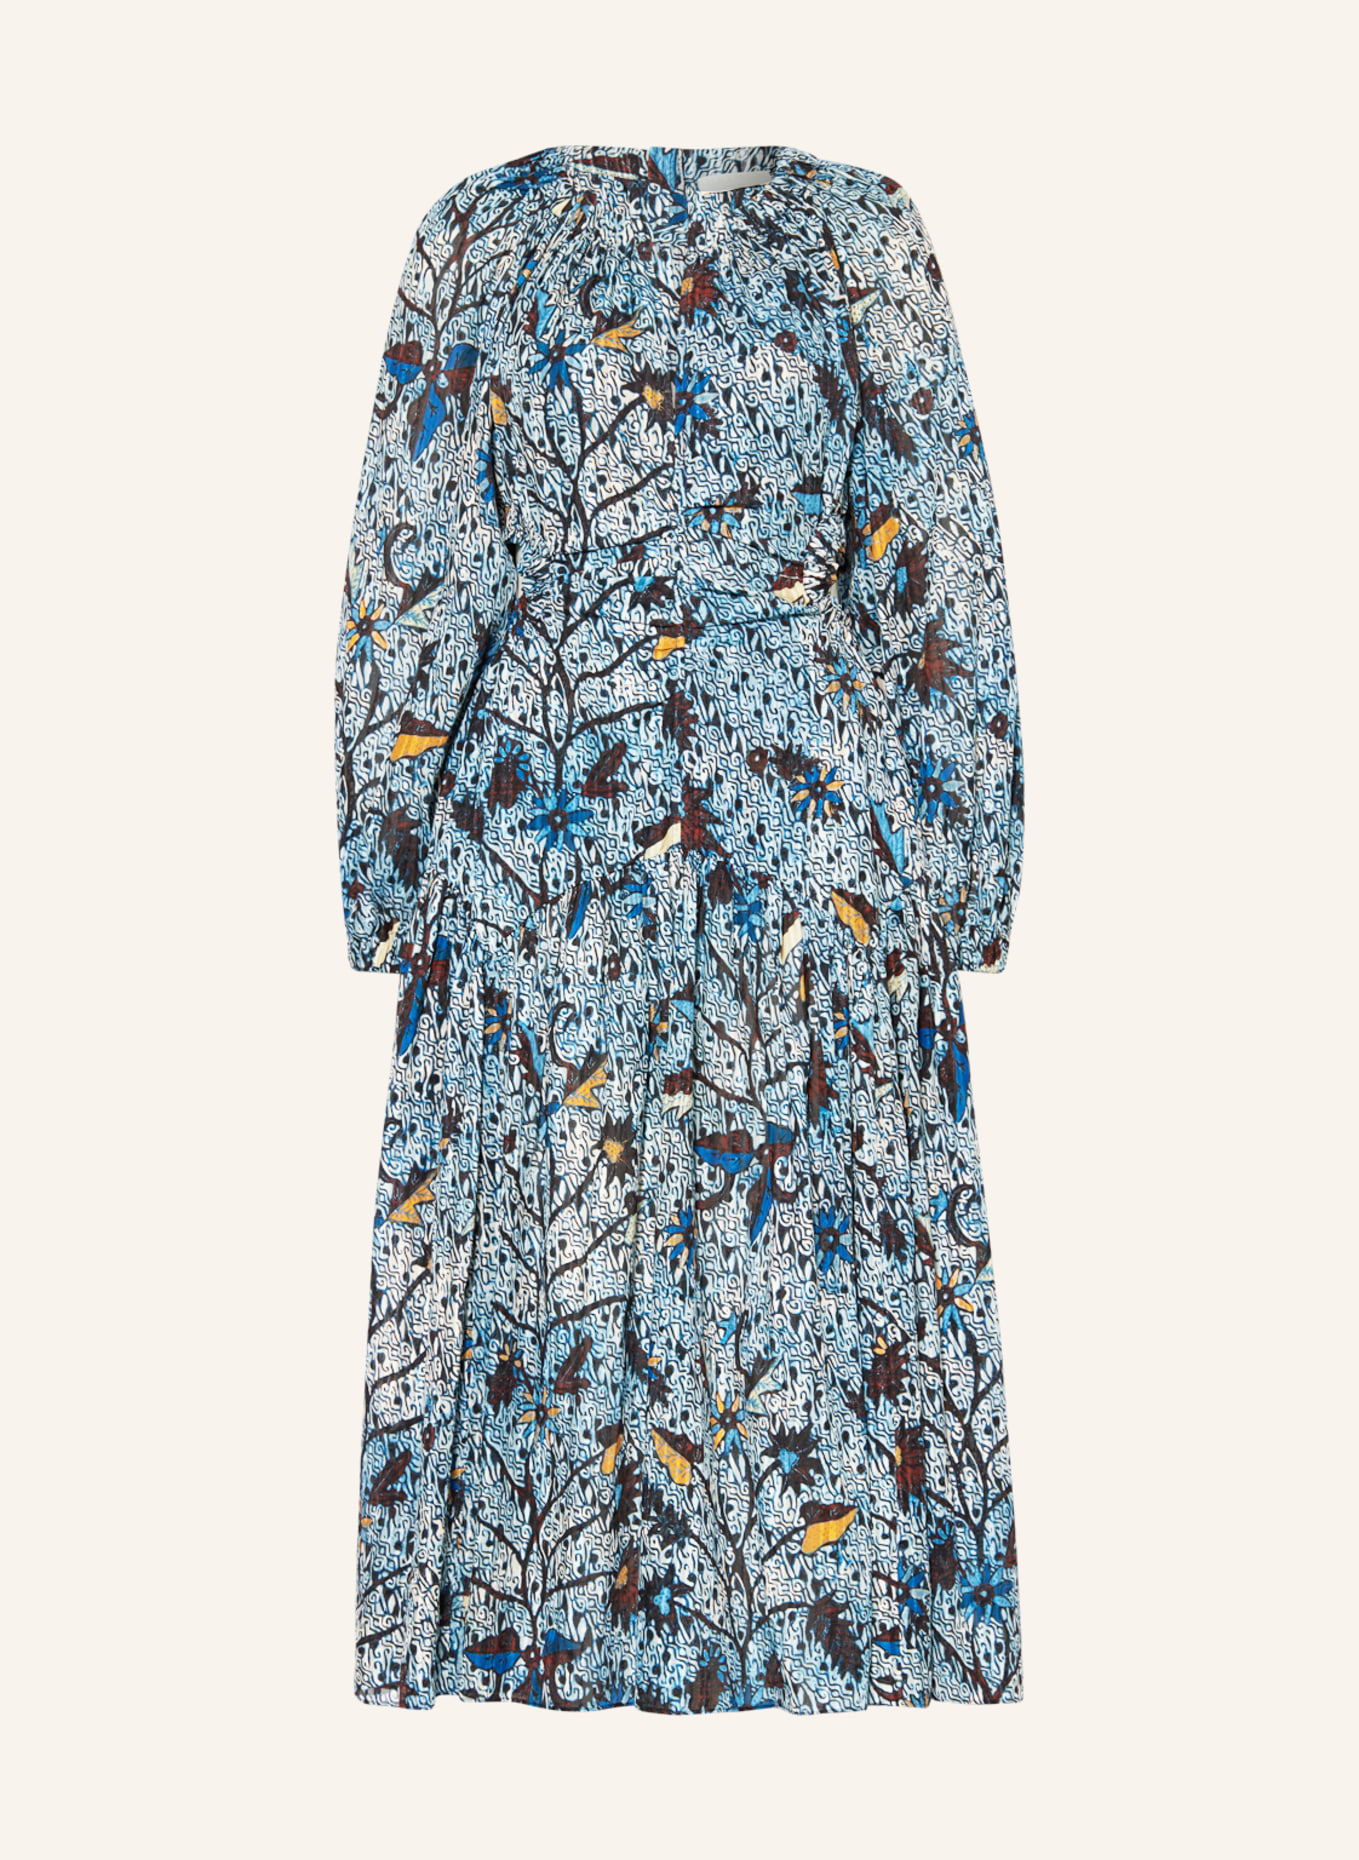 ULLA JOHNSON Dress HELIA with cut-outs, Color: DARK BLUE/ DARK YELLOW/ WHITE (Image 1)